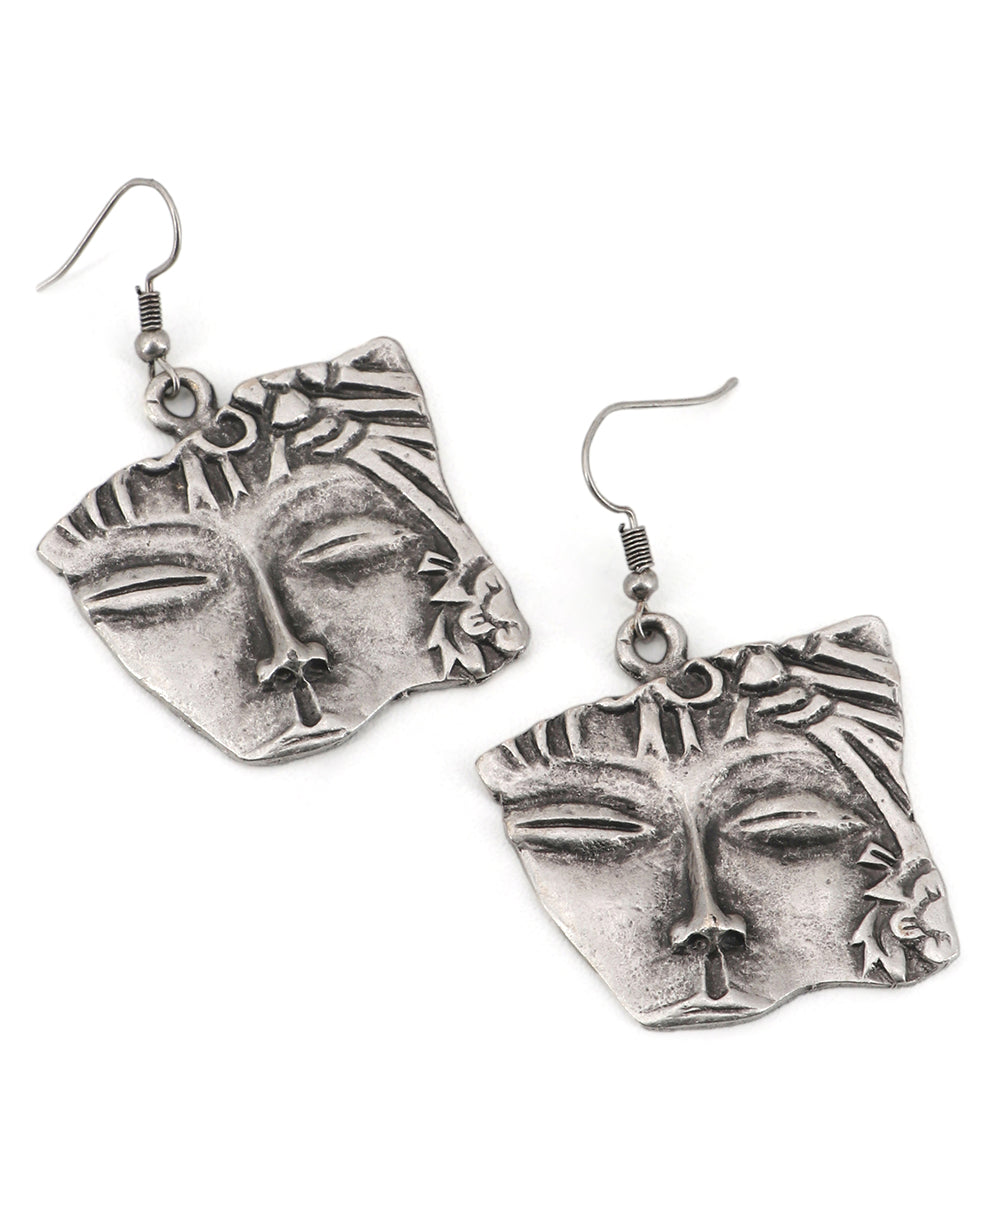 Artistic face statement earrings